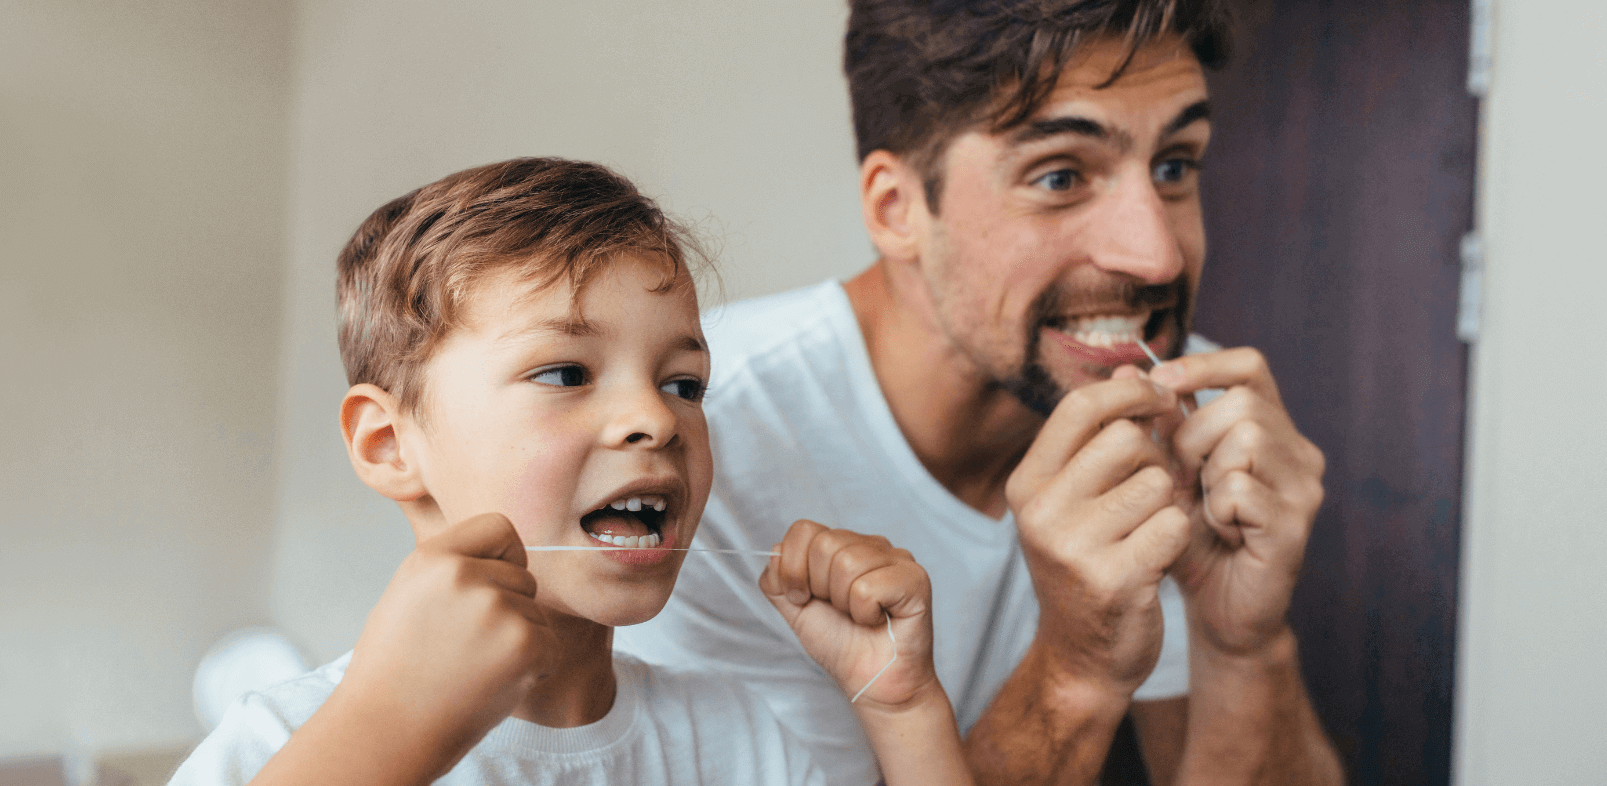 Dad and son flossing their teeth in the mirror